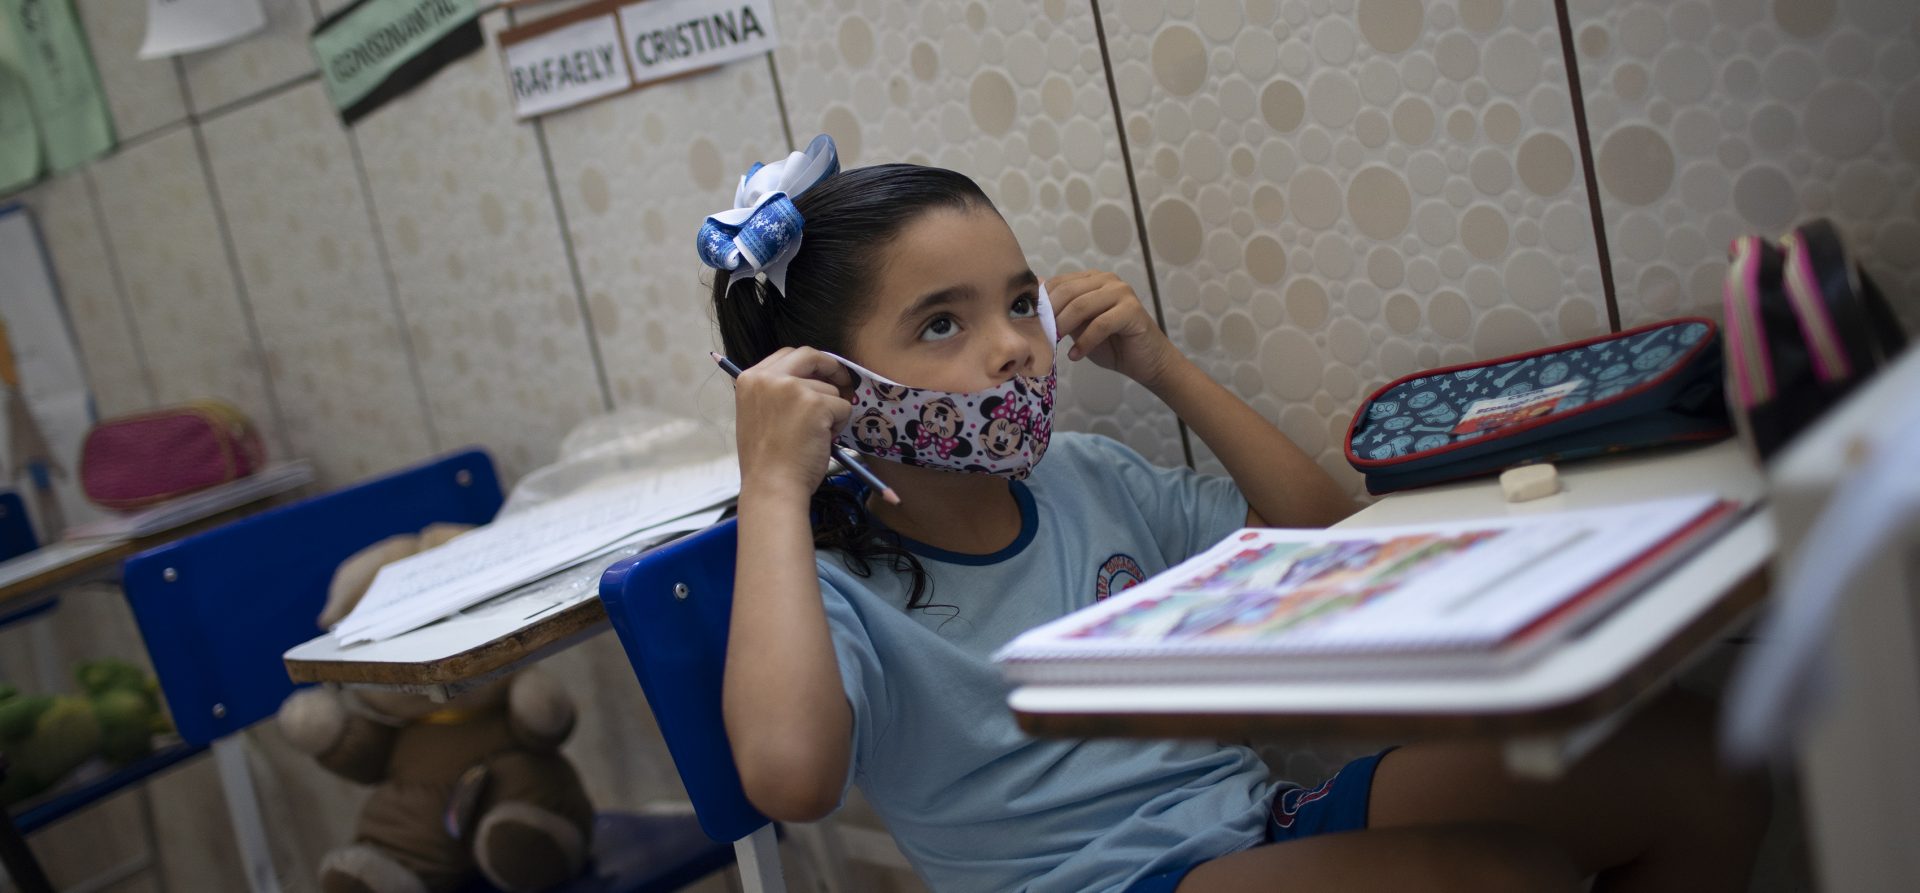 Rafaely de Melo puts on her protective mask during a class at the Pereira Agustinho daycare, nursery school and pre-school, after it reopened amid the new coronavirus pandemic in Duque de Caxias, Monday, July 6, 2020. The city of Manaus in the Amazon rainforest and Duque de Caxias in Rio de Janeiro’s metropolitan region, became on Monday the first Brazilian cities to resume in-person classes at private schools since the onset of the COVID-19 pandemic, according to the nation's private school federation.